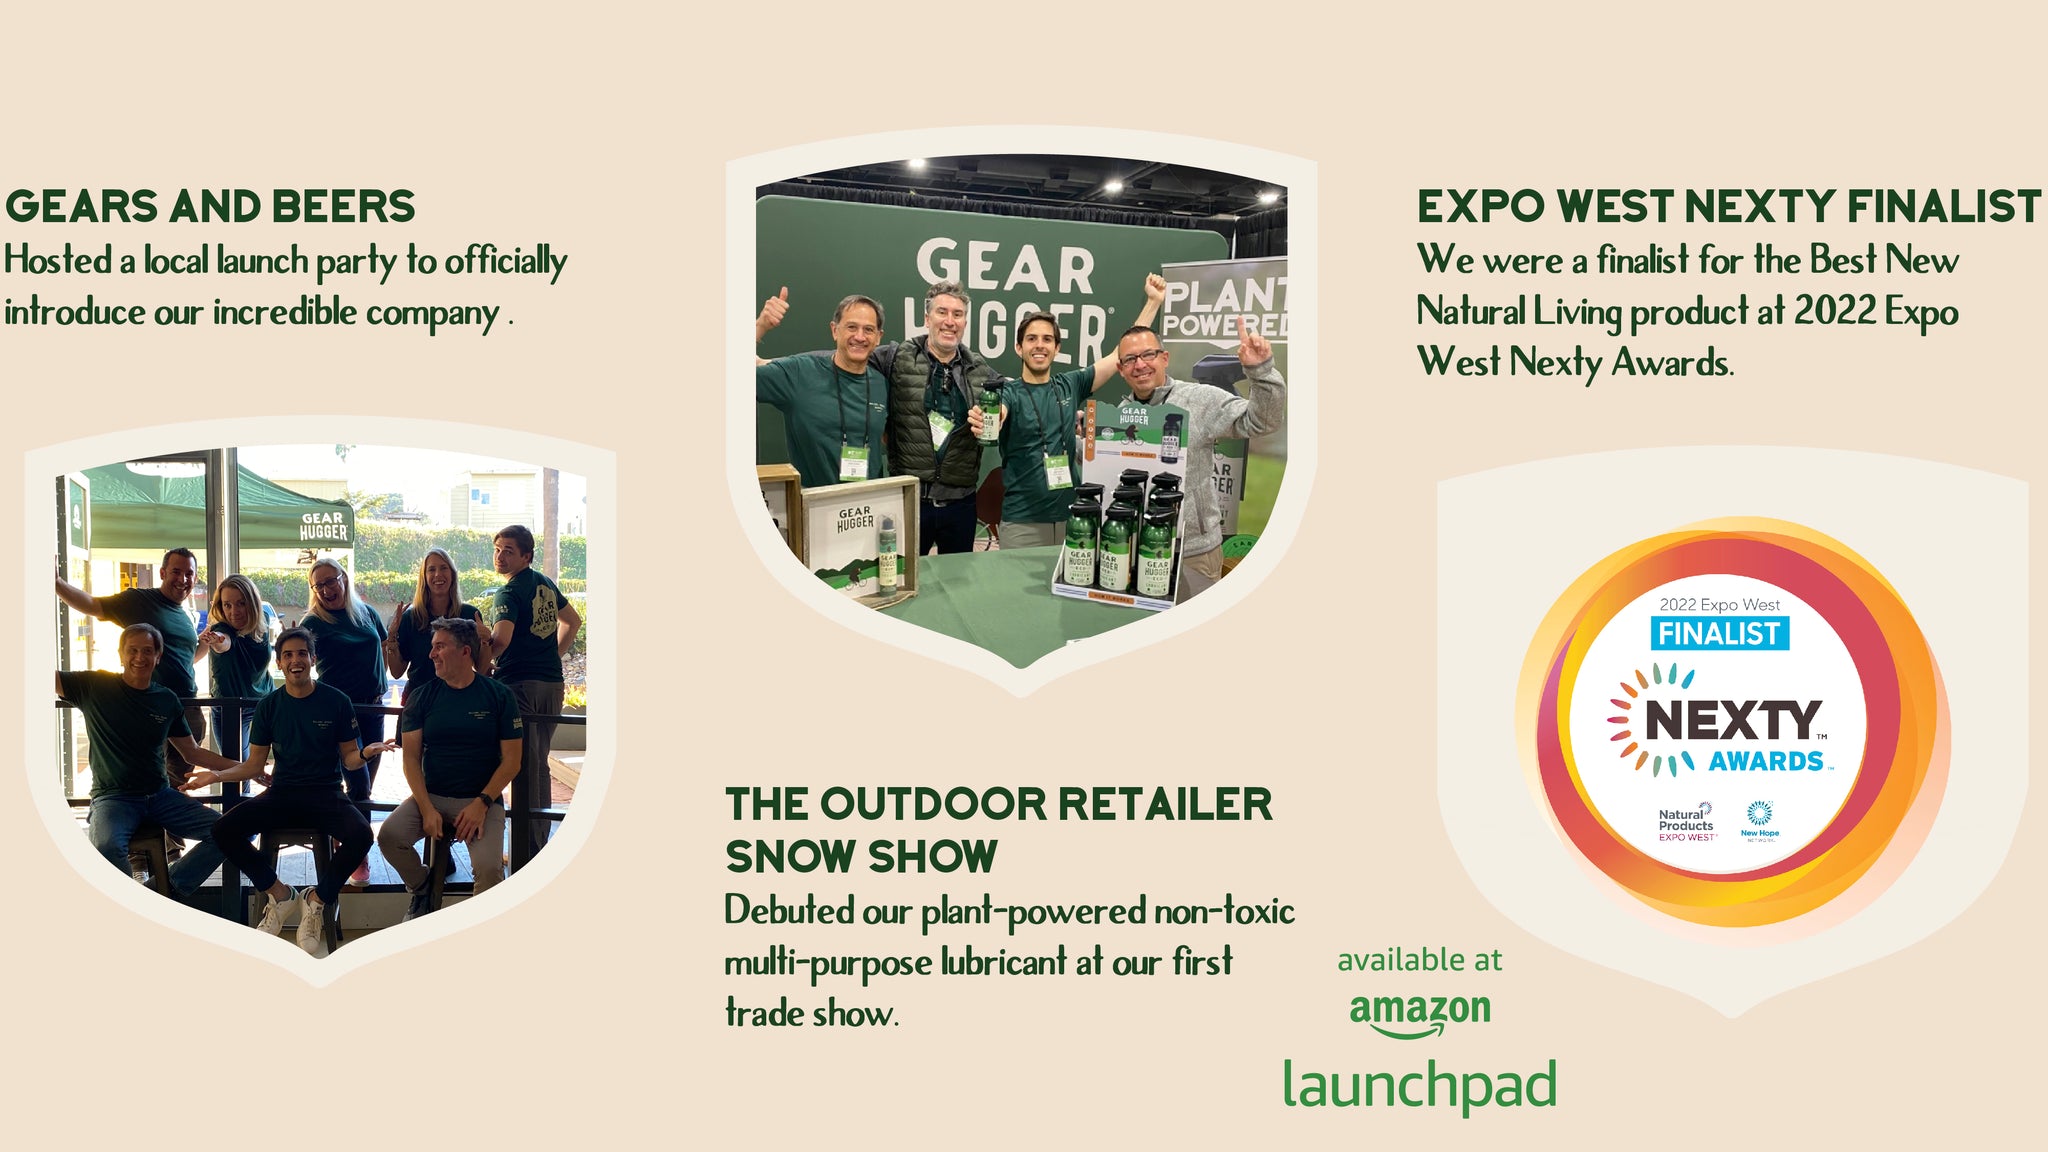 We hosted a local launch party to officially introduce our incredible company. We debuted our plant-powered non-toxic multi-purpose lubricant at our first trade show. We were a finalist for the Best New Natural Living product at 2022 Expo West Nexty Awards 